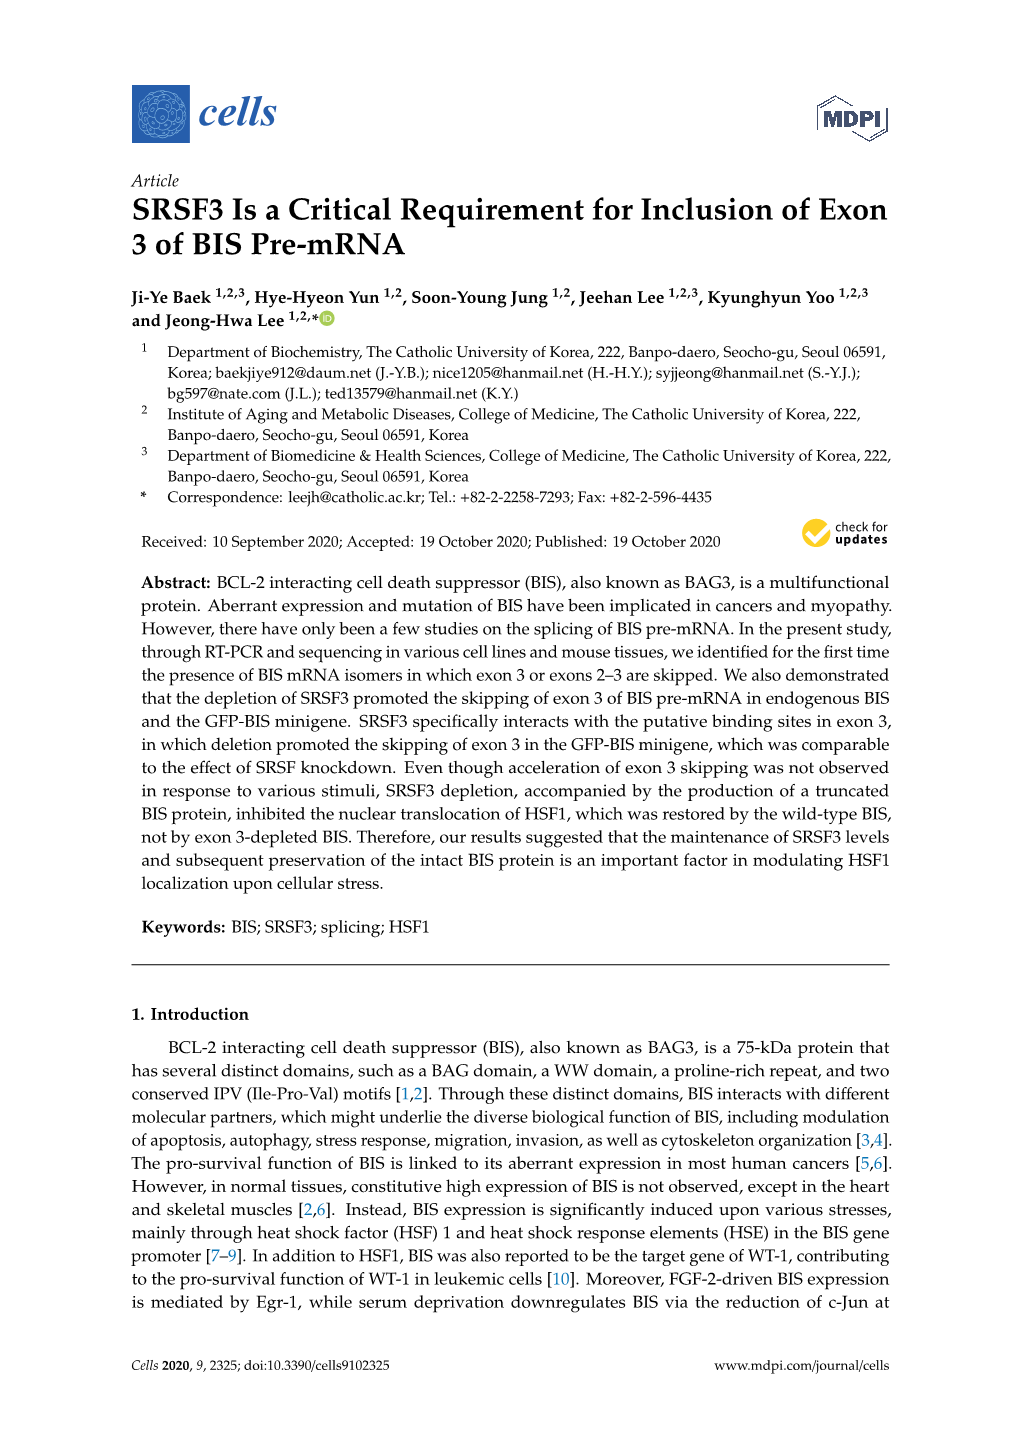 SRSF3 Is a Critical Requirement for Inclusion of Exon 3 of BIS Pre-Mrna